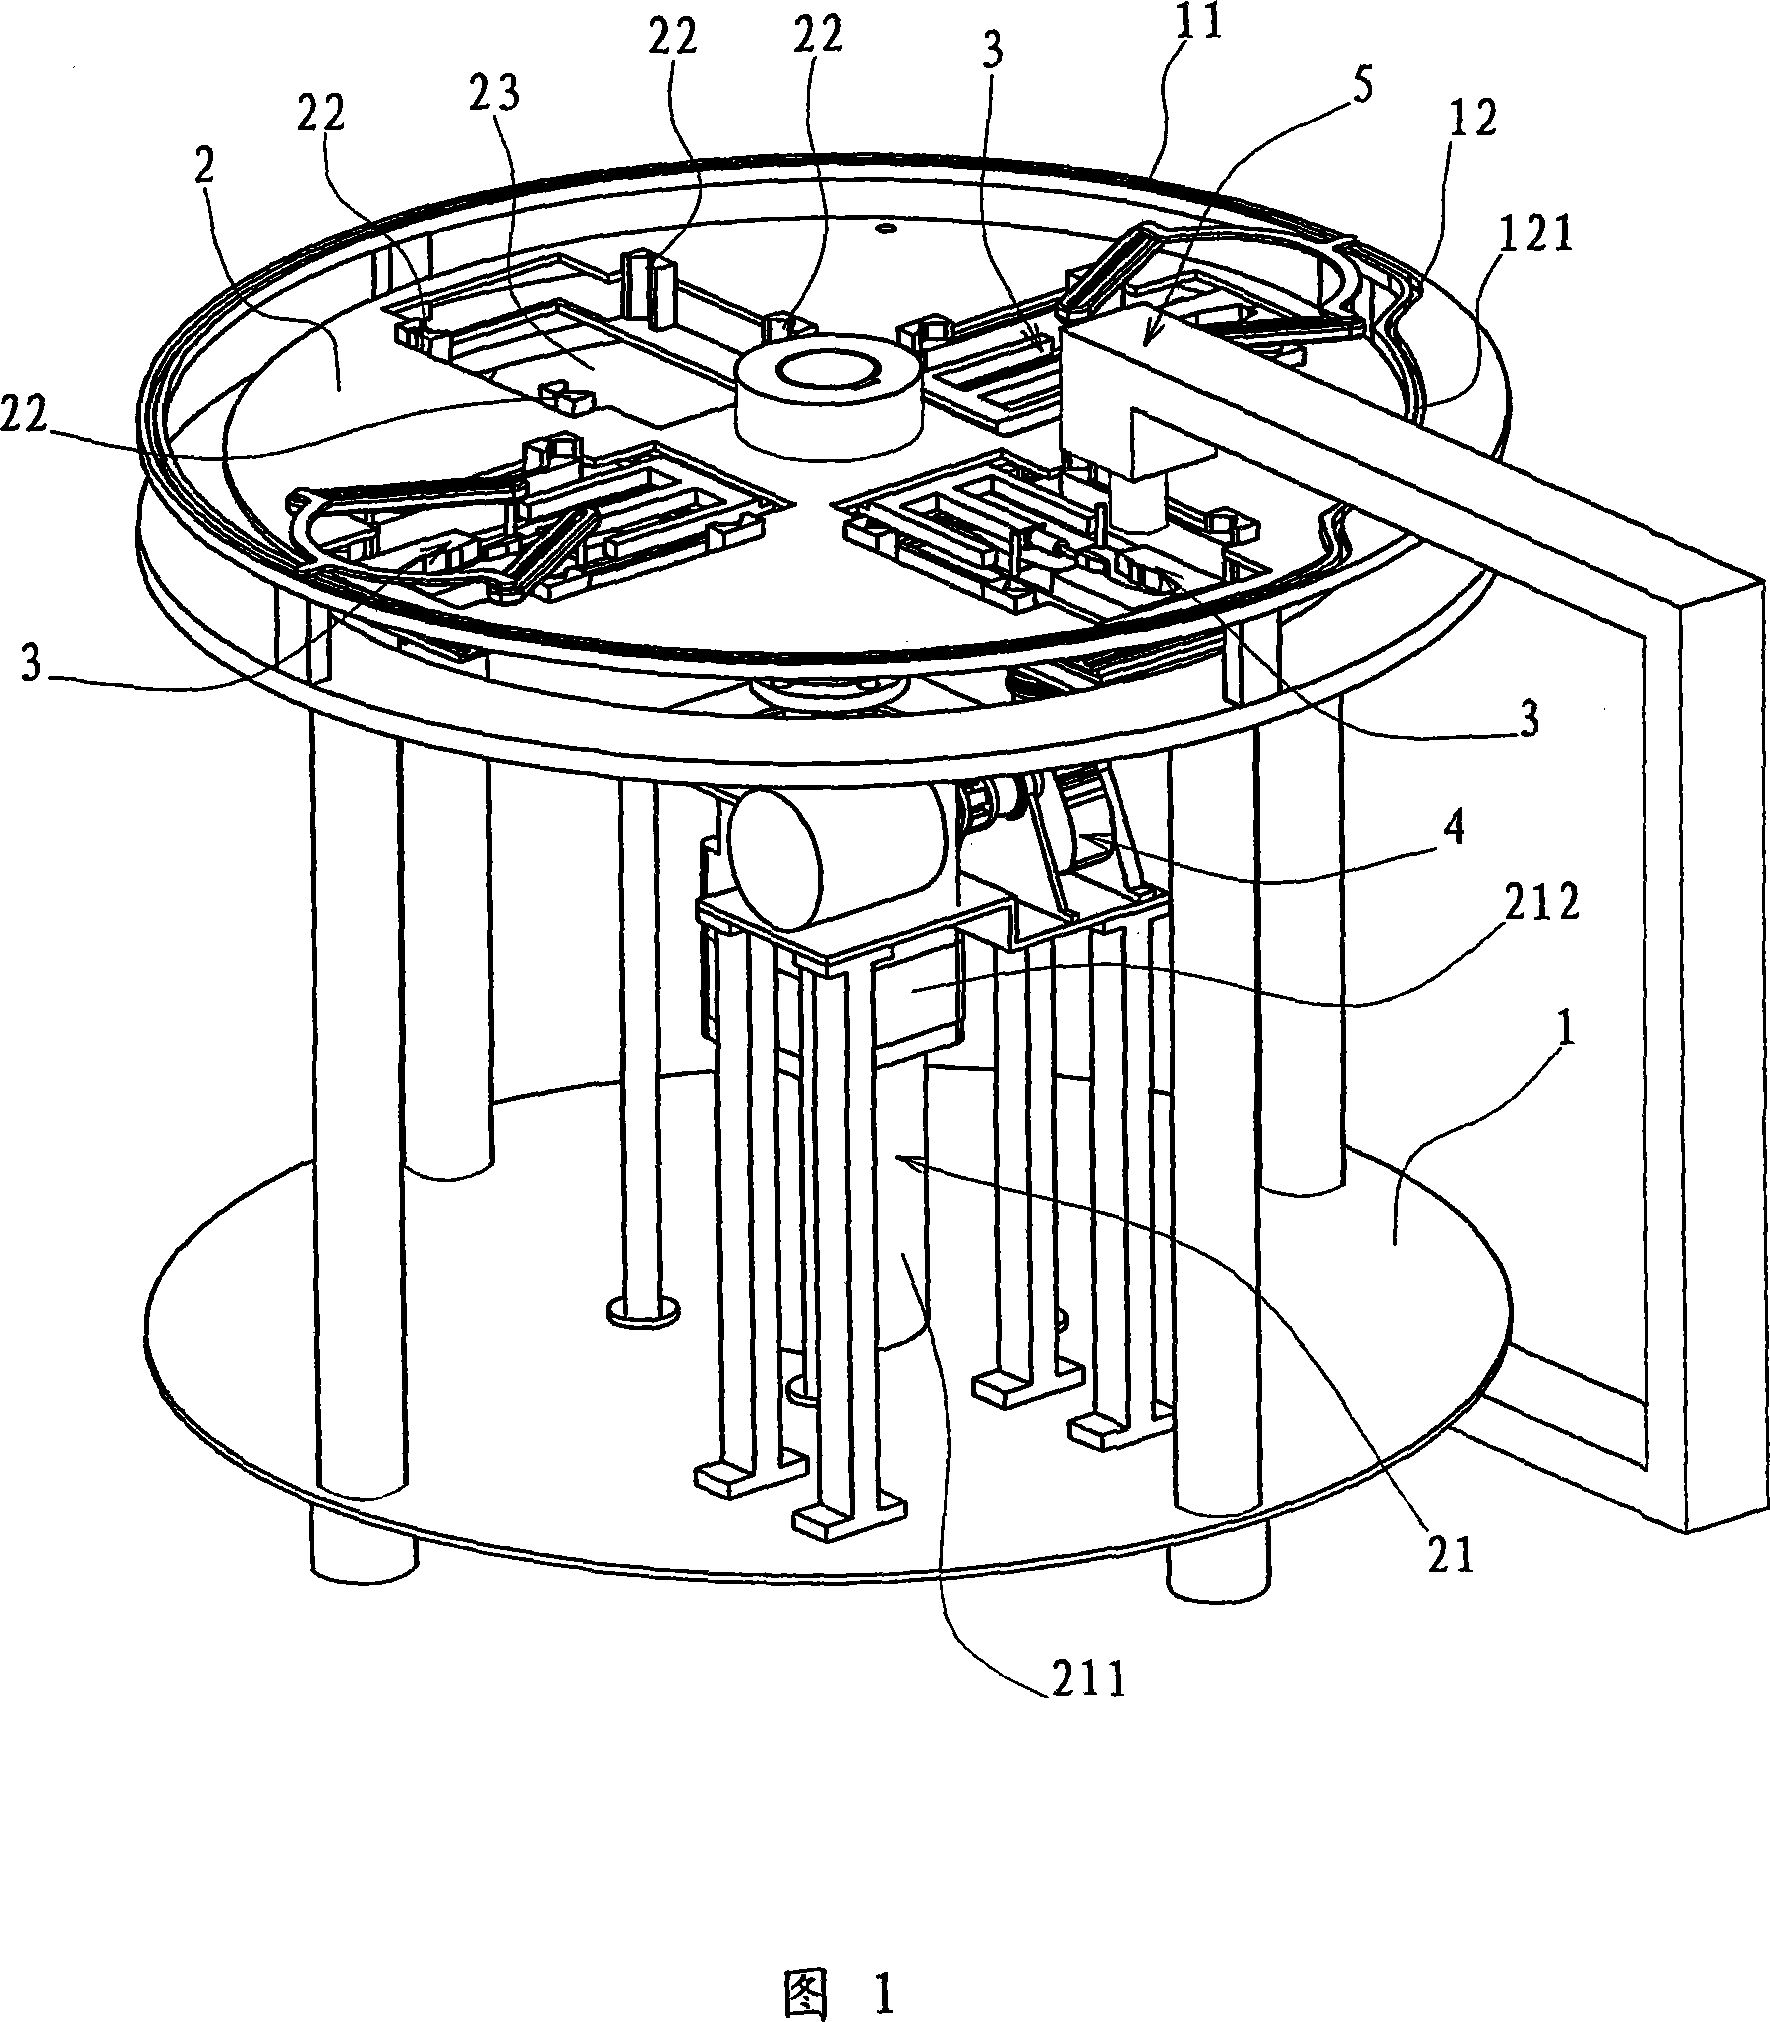 Quenching apparatus for tool edge